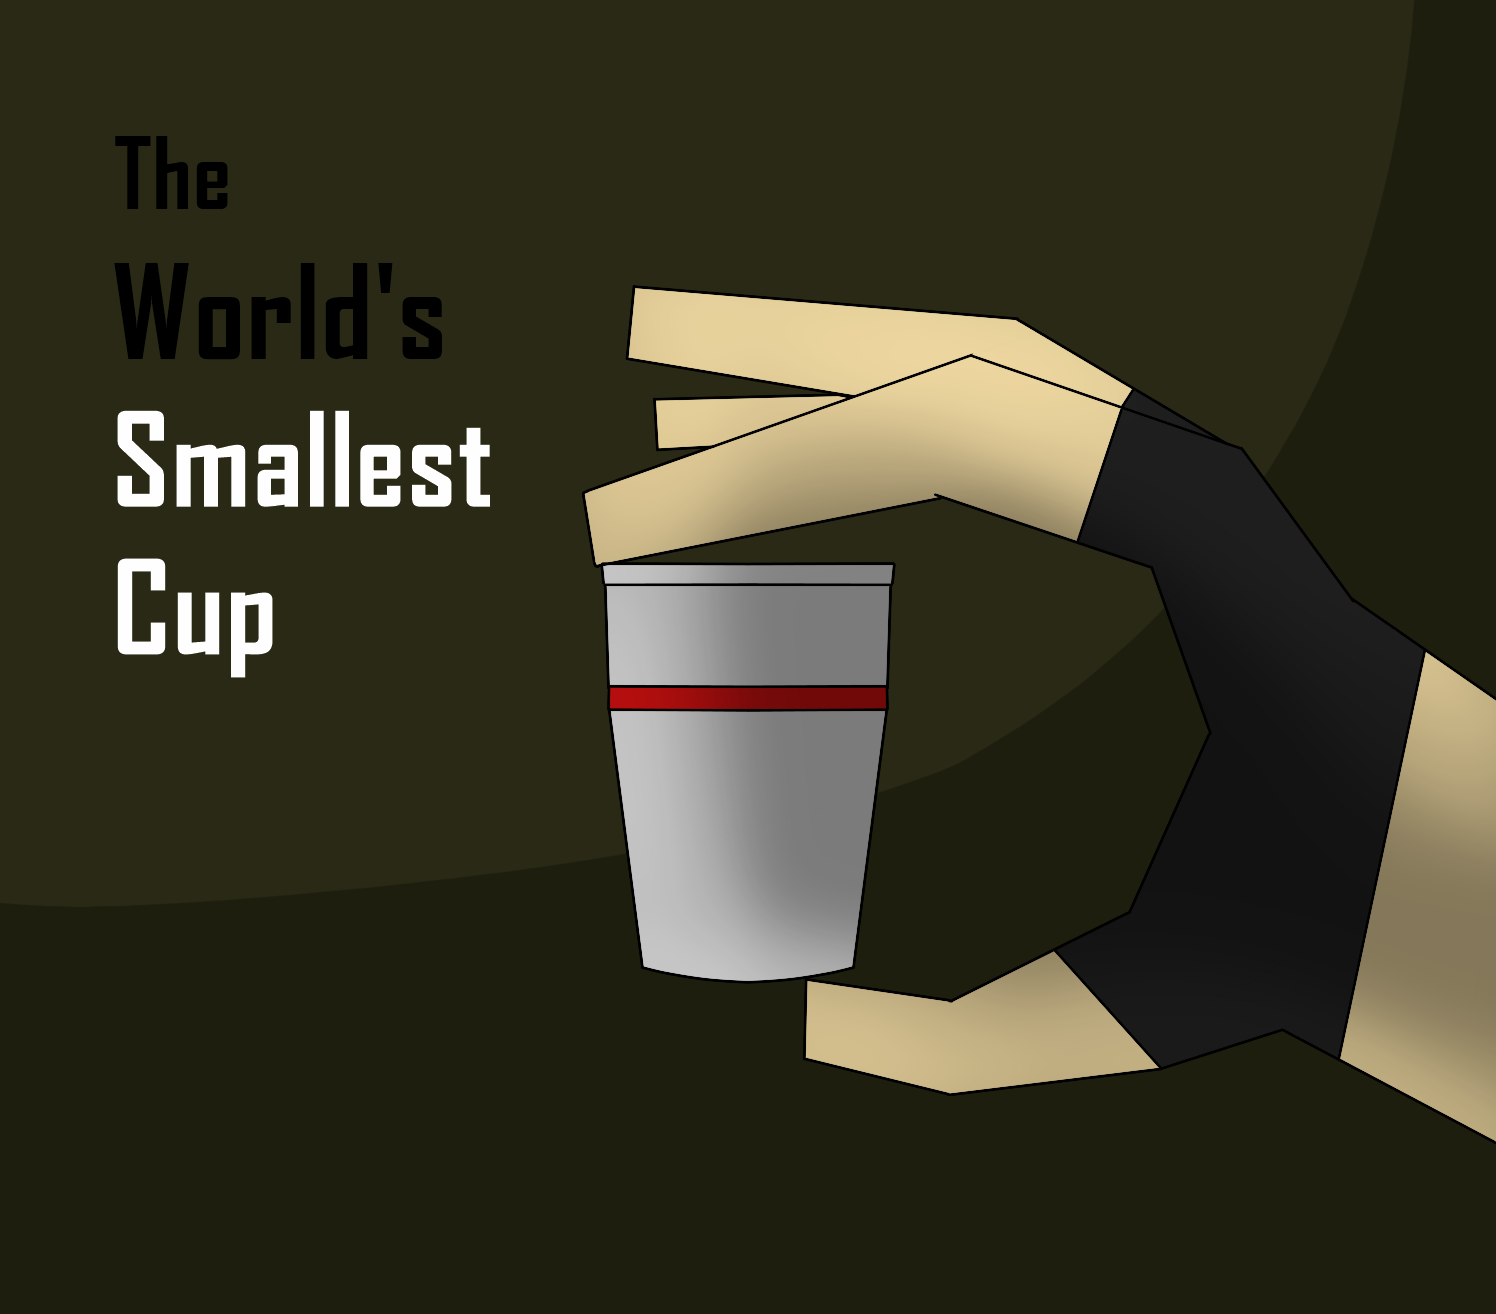 The world 's smallest cup by XxHeavy-swagxX on DeviantArt